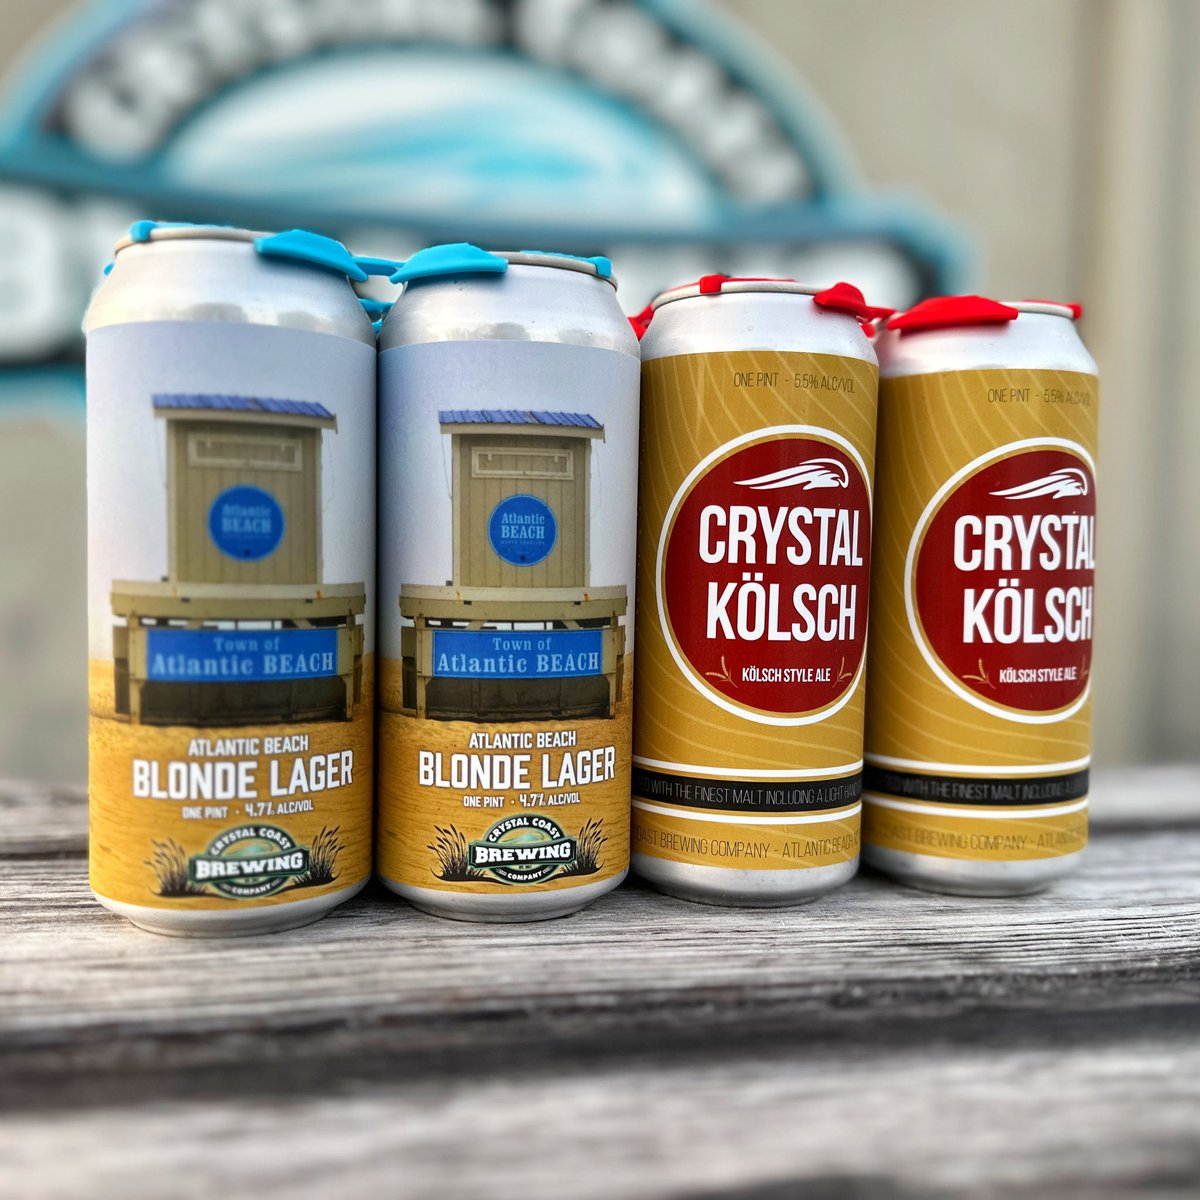 For our light beer fans, Atlantic Beach Blonde Lager and Crystal Kölsch are fresh in cans!